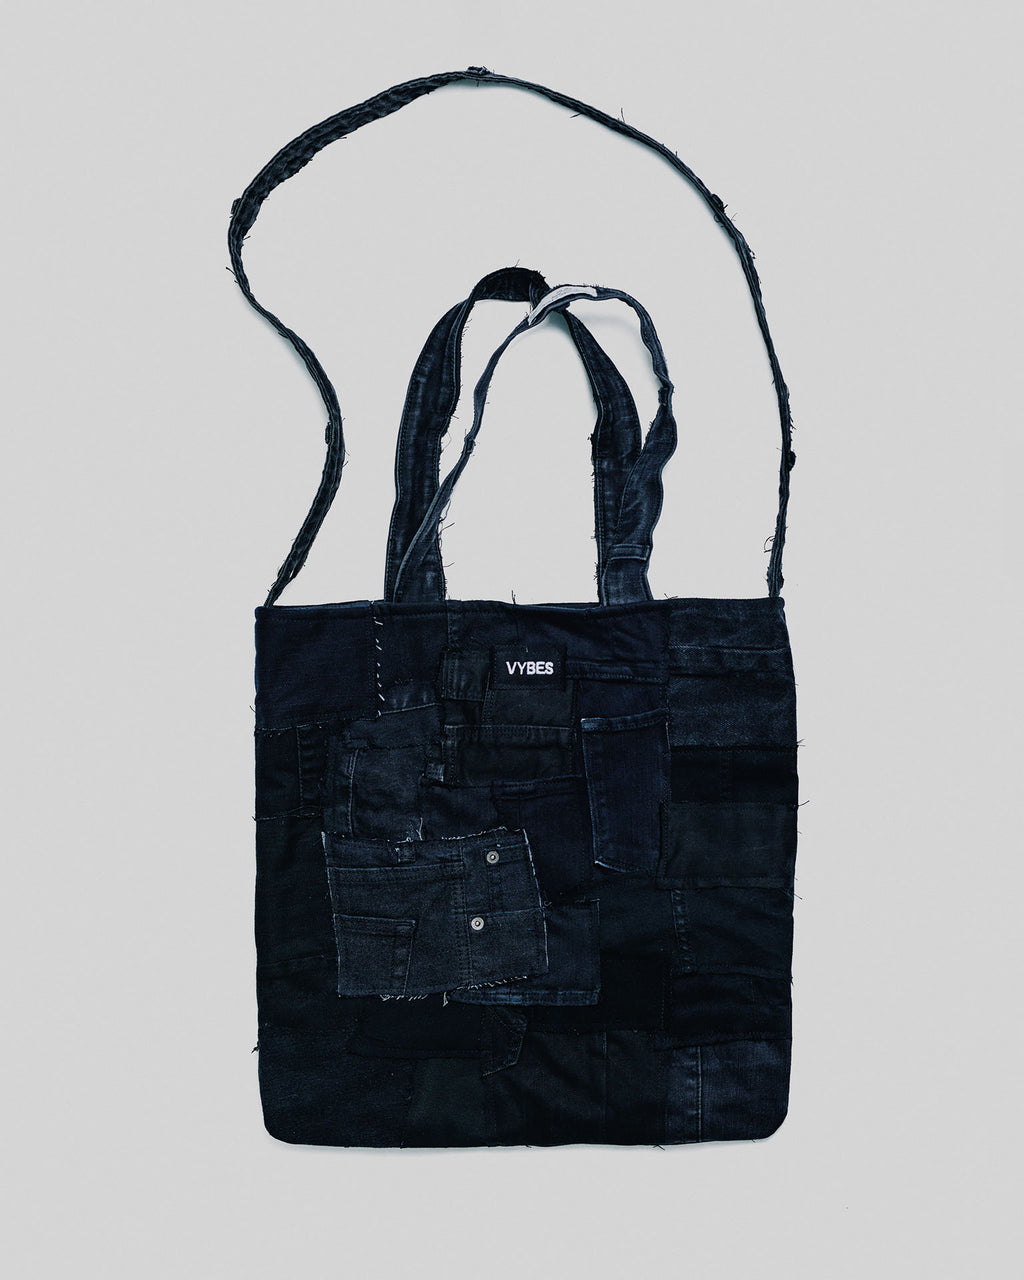 JAPANESE RECYCLED DENIM TOTES BY RAG RESERVE Hero